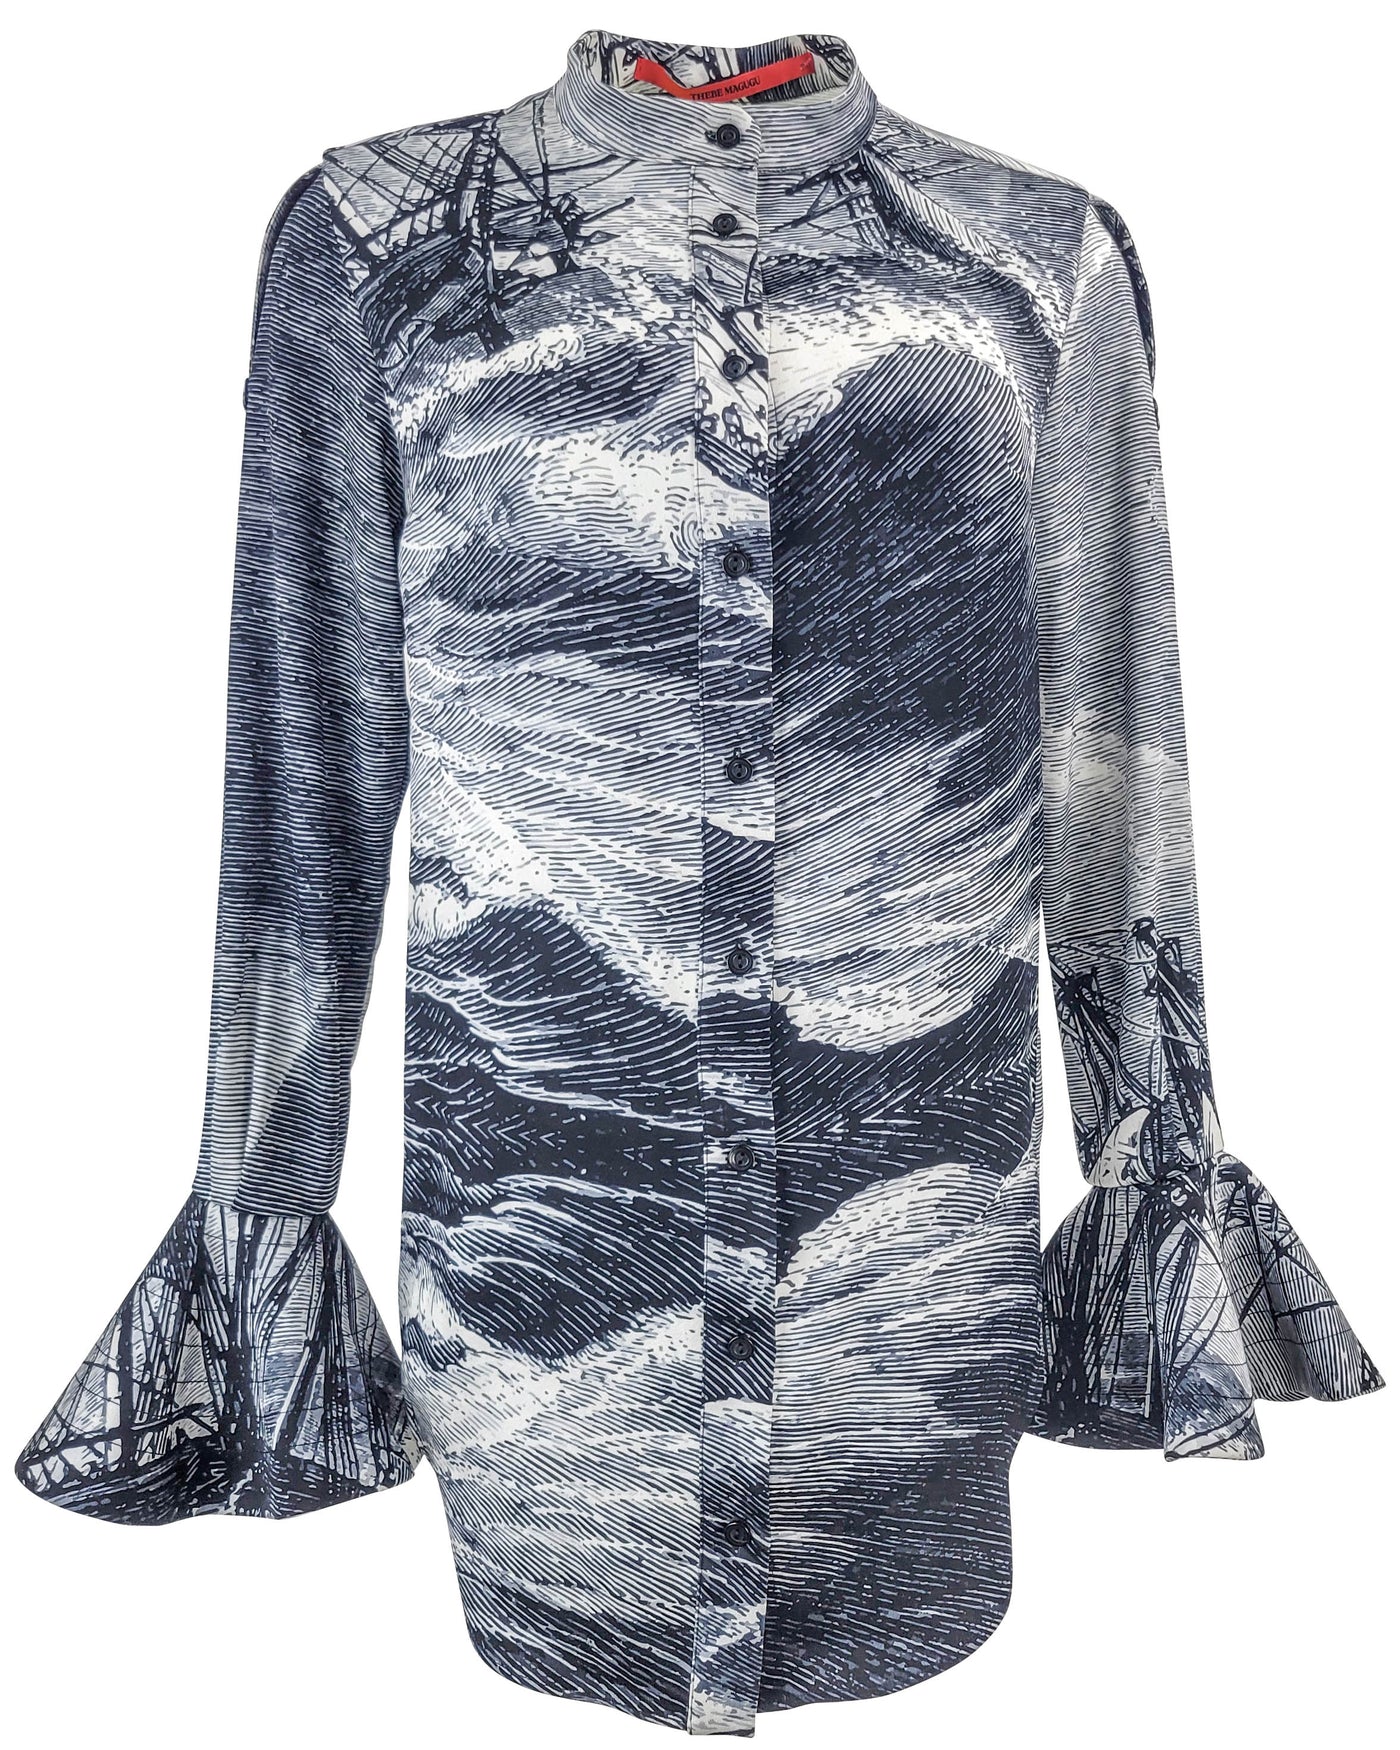 Thebe Magugu Shipwreck Blouse in Black and Silver - Discounts on Thebe Magugu at UAL